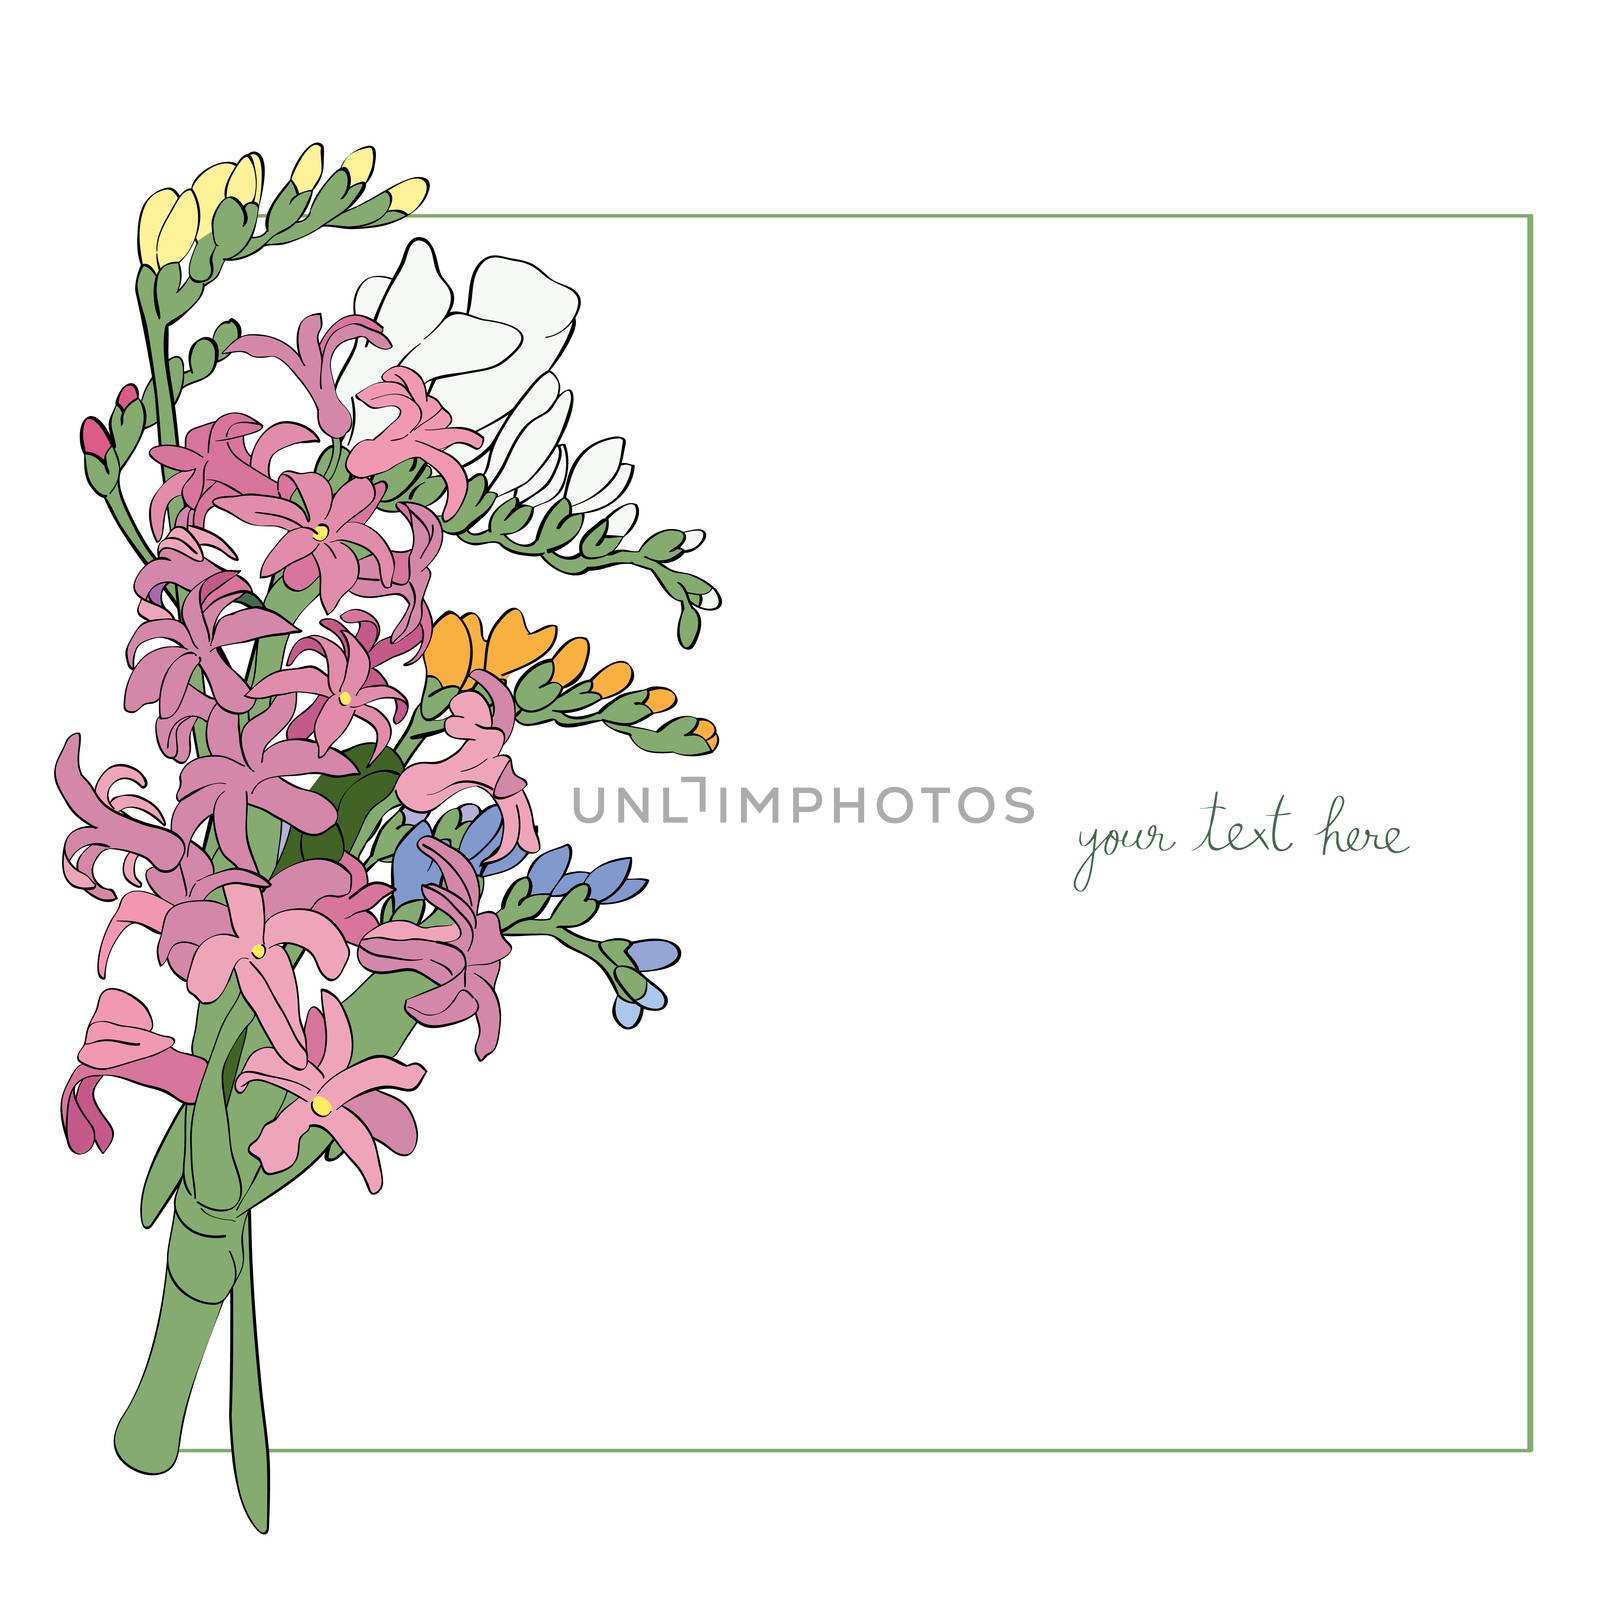 Spring flowers bouquet card illustration, sparse composition with simple frame over white